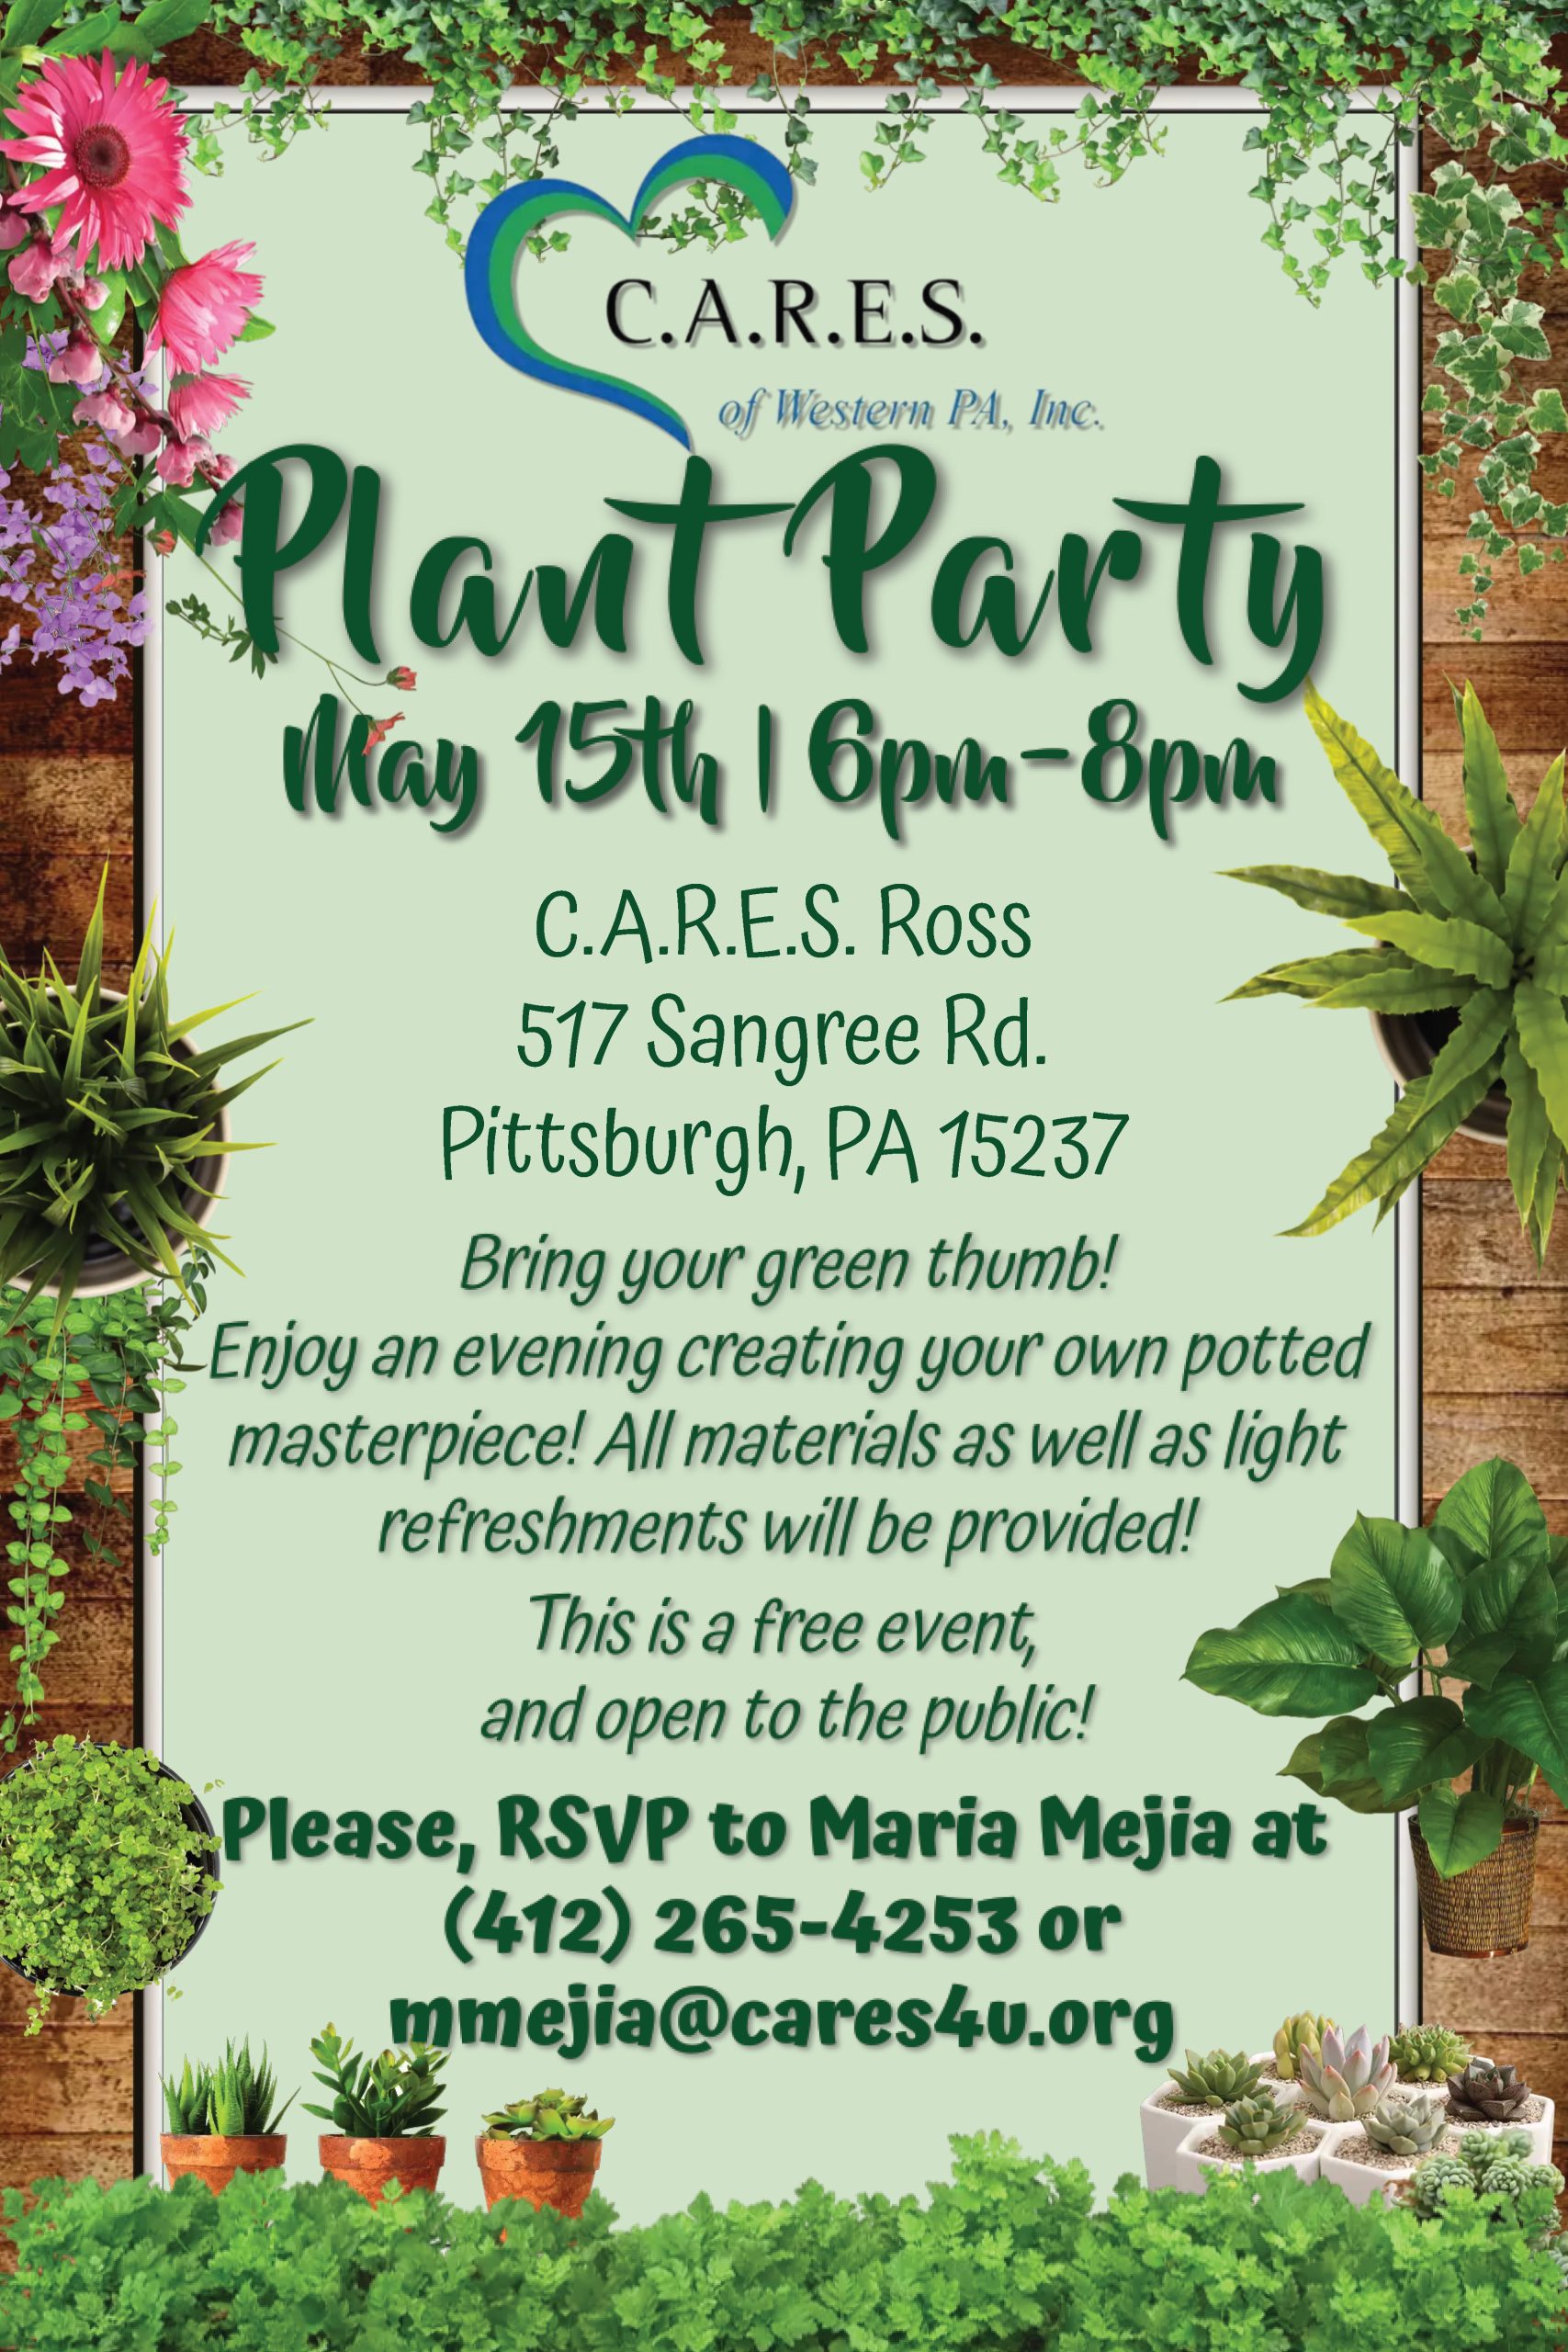 C.A.R.E.S. Plant Party - Pittsburgh 4